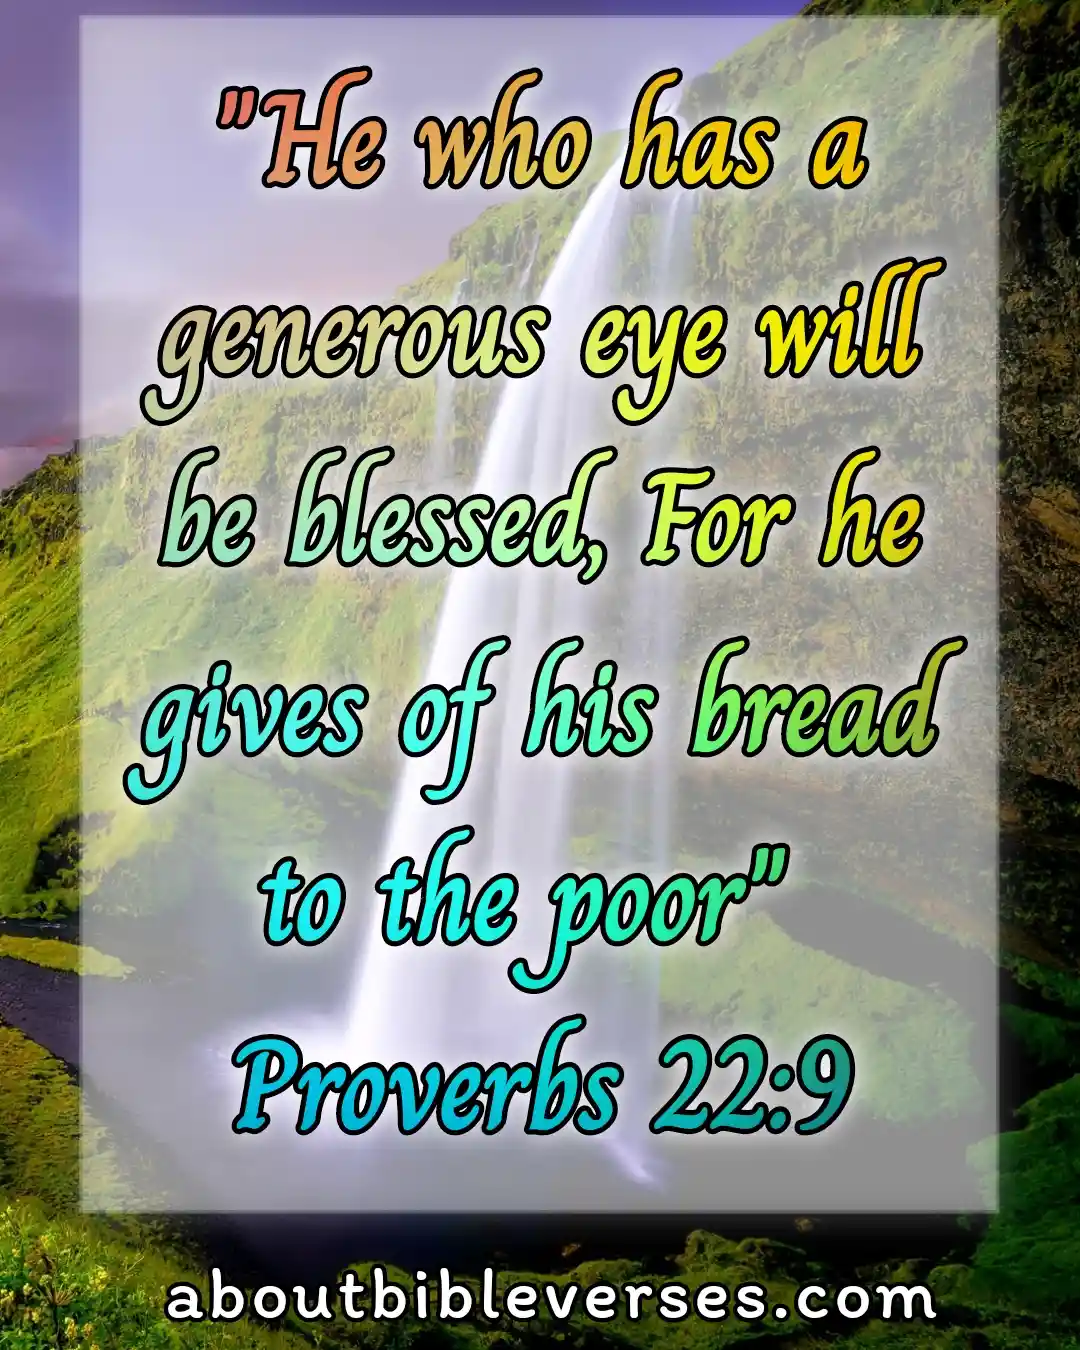 Bible Verses About Feeding The Hungry (Proverbs 22:9)